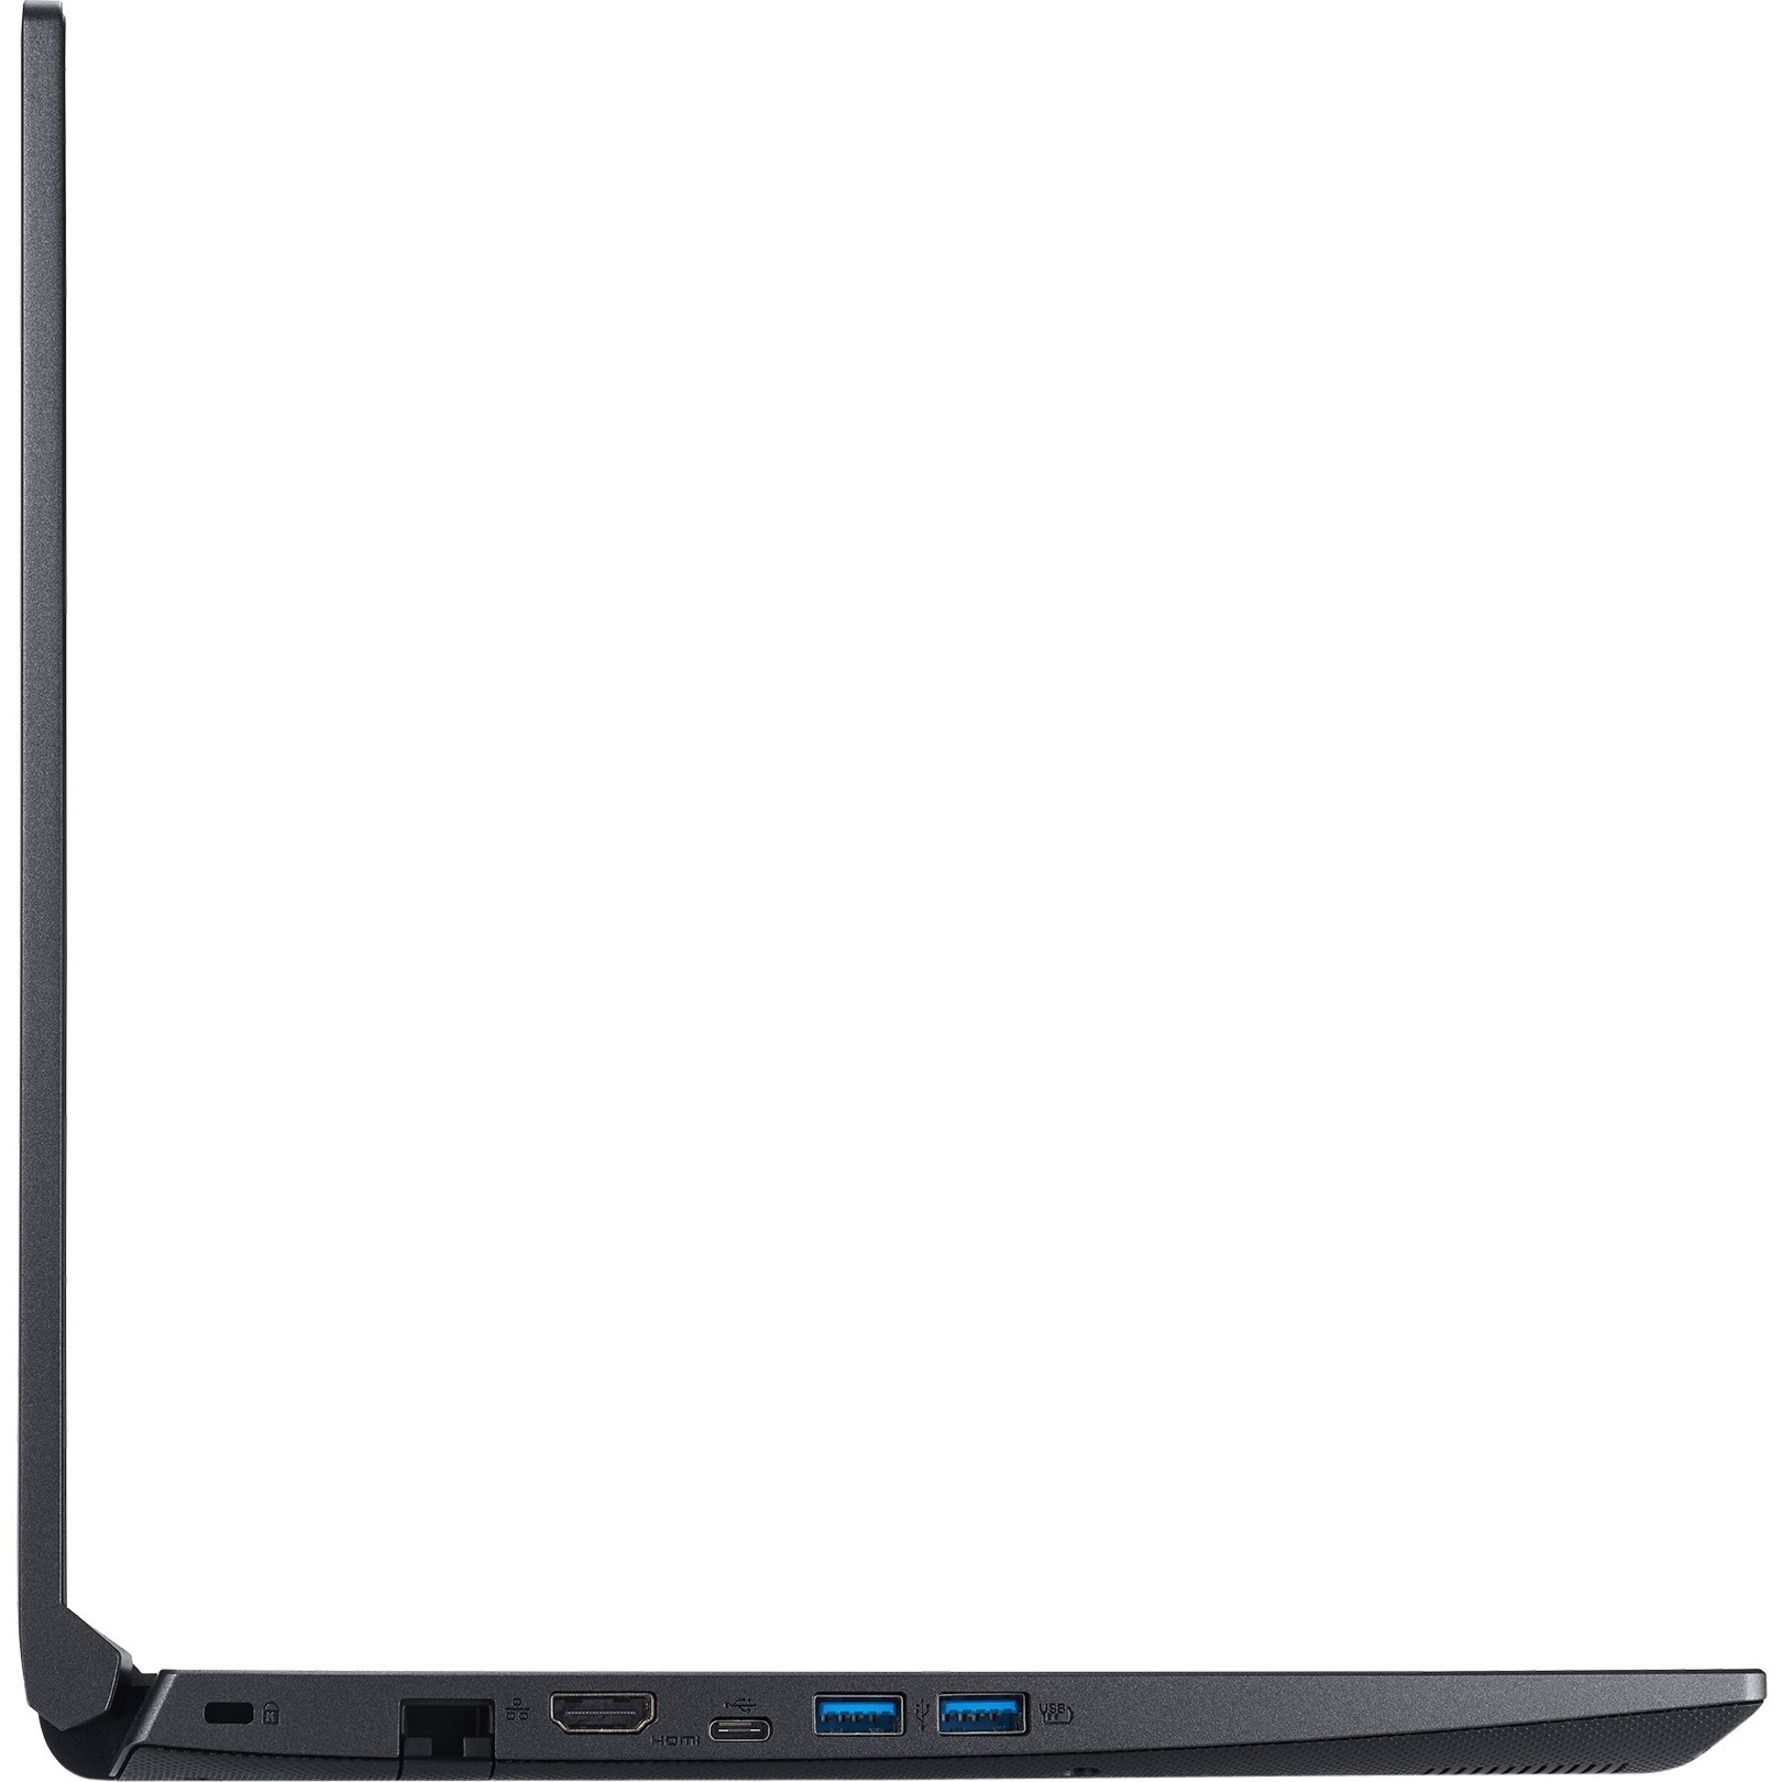 Acer Aspire 7 15.6" Full HD Laptop, Intel Core i5 i5-9300H, 512GB SSD, Windows 10 Home, A715-75G-544V - image 5 of 9